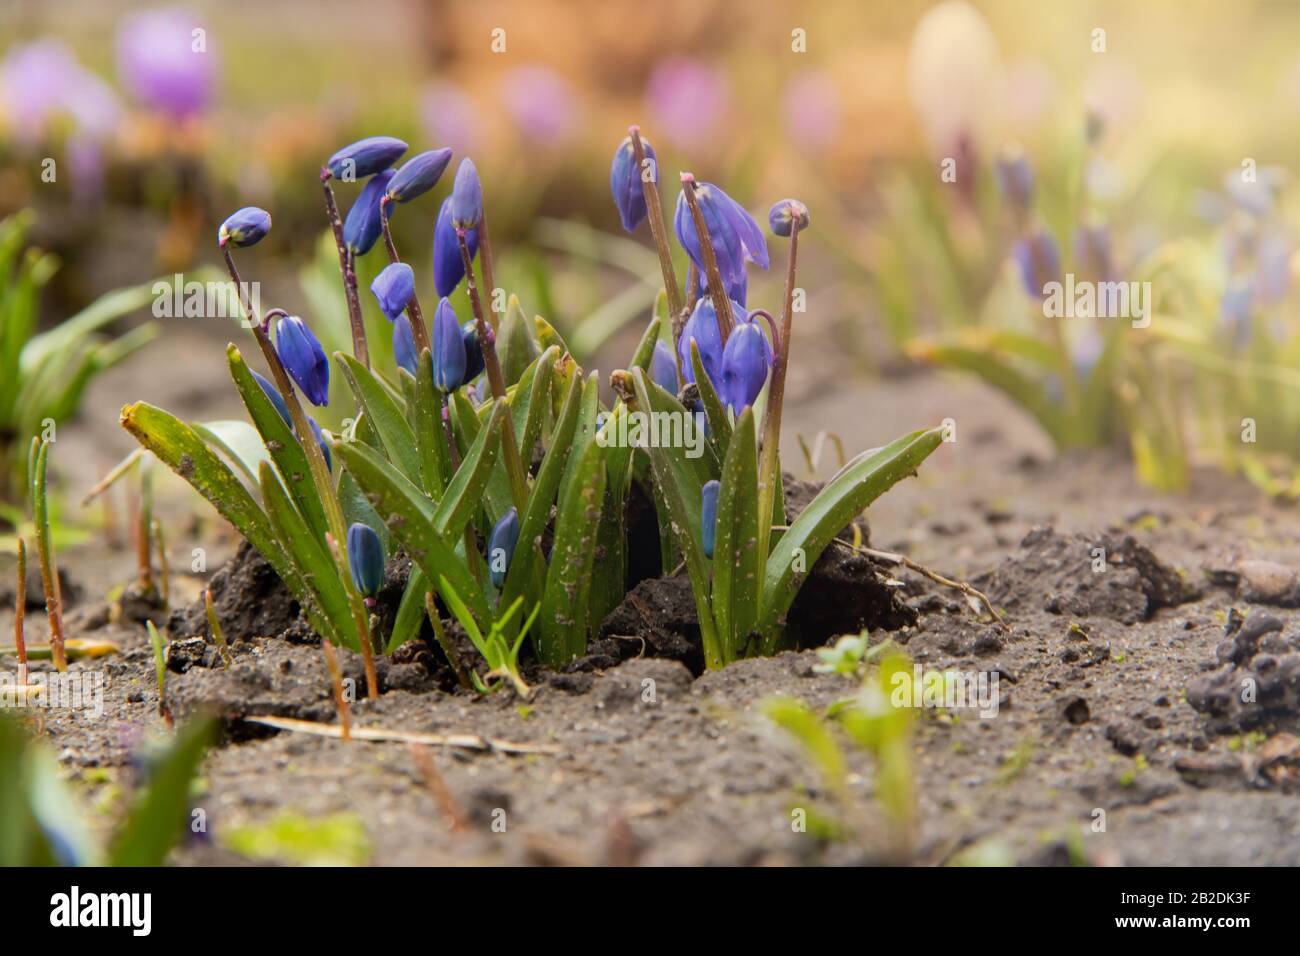 A group of young bluebell flowers sprouting on a flowerbed in the background of a warm spring sun with copyspace Stock Photo